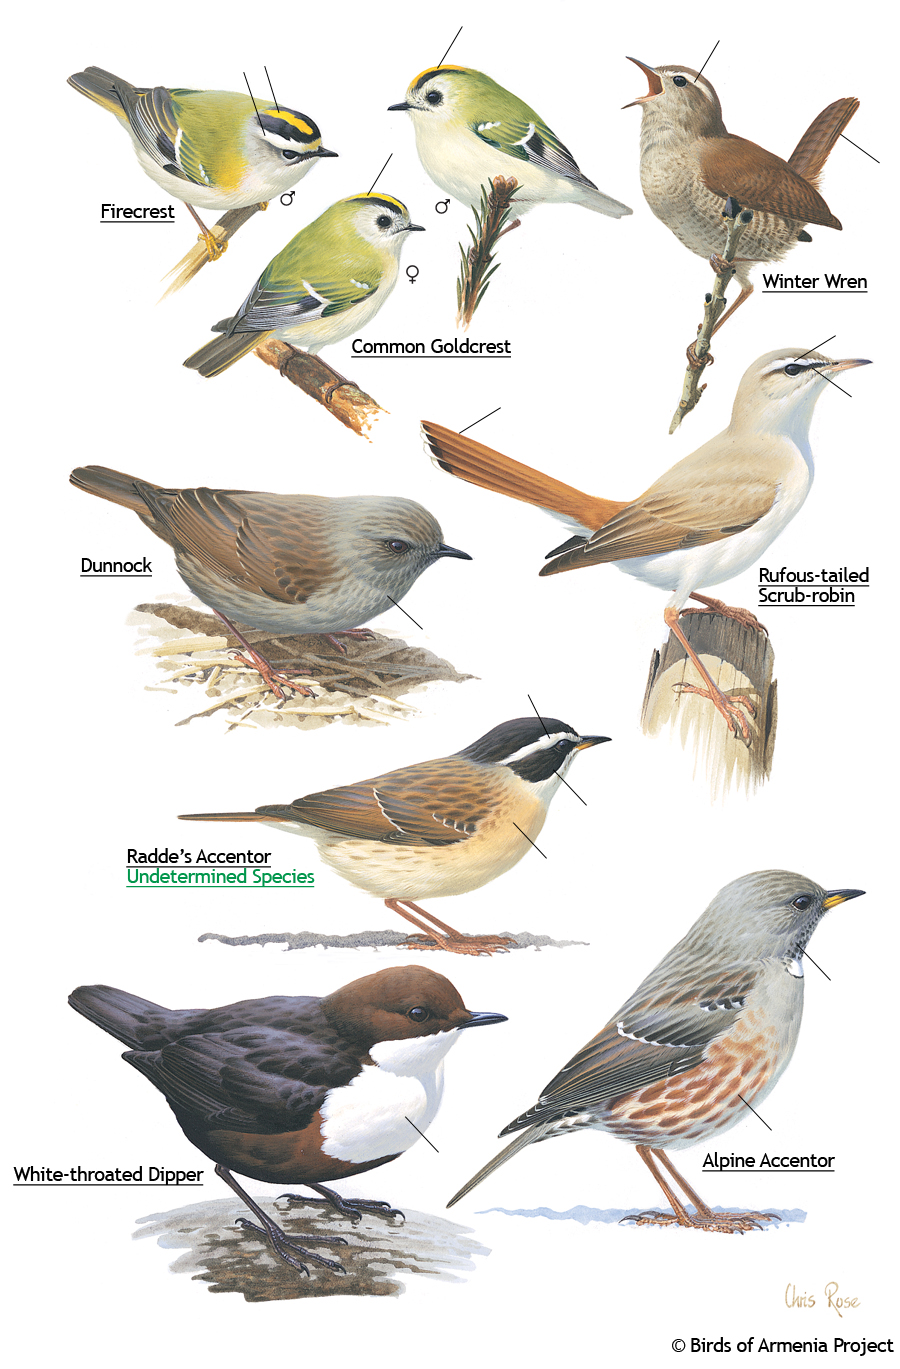 Firecrests, wren, goldcrests, dunnocks, scrub-robins, accentors, and dippers